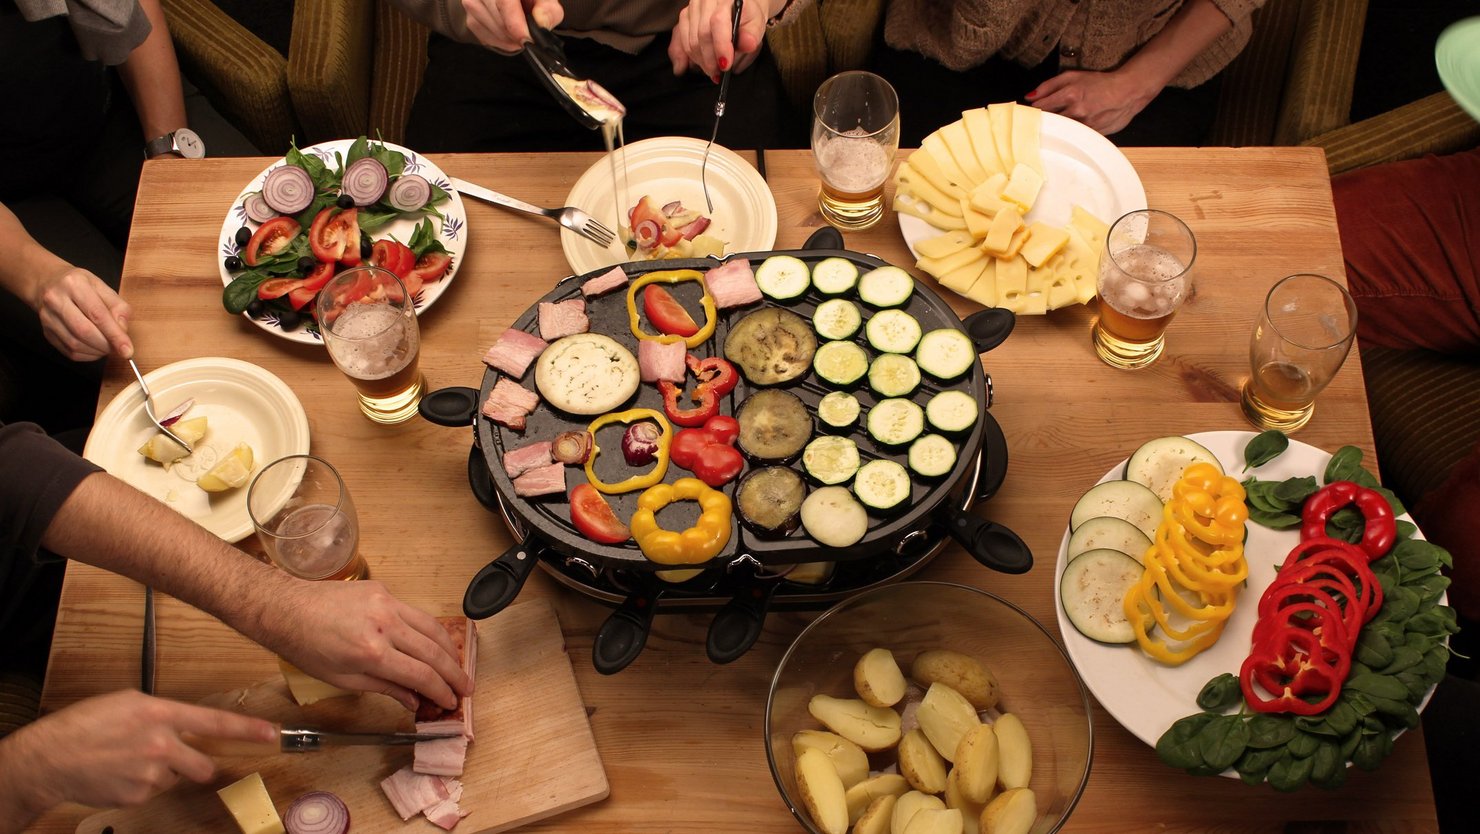 [Translate to FI (Finland):] Table with raclette oven and dishes with potatoes, vegetables and cheese